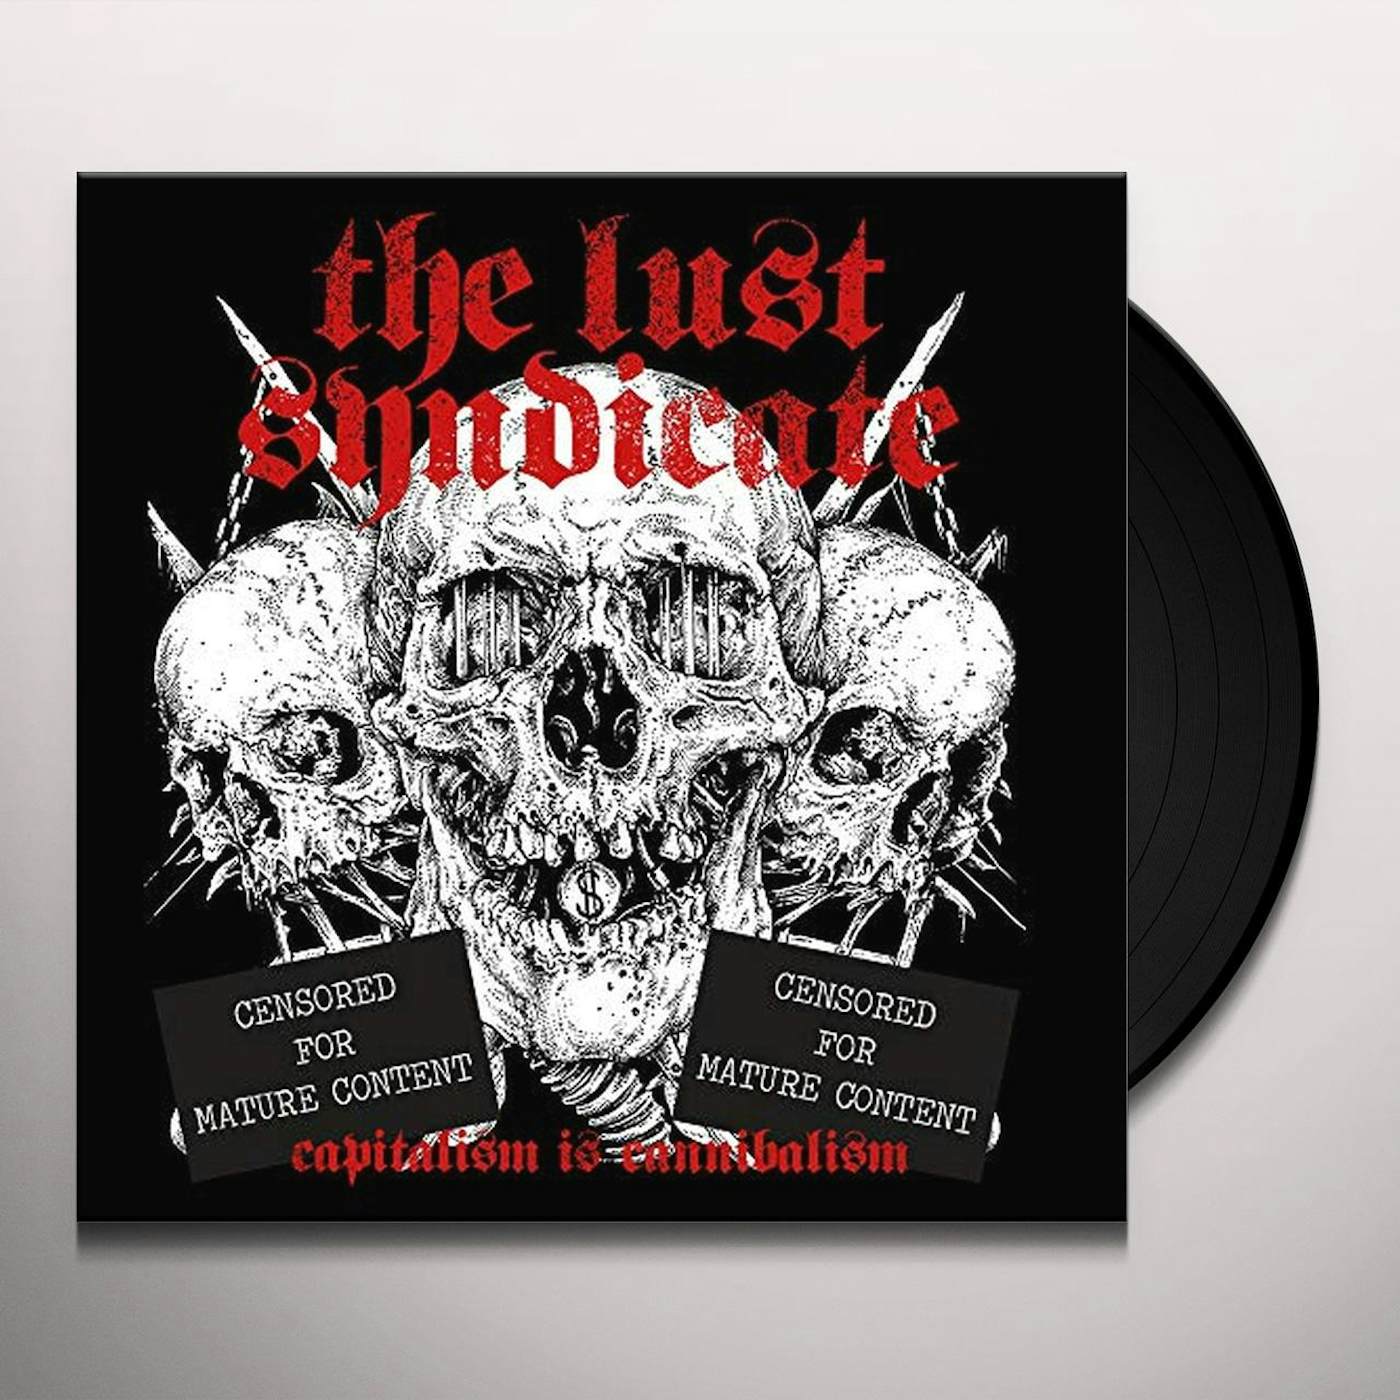 The Lust Syndicate CAPITALISM IS CANNIBALISM Vinyl Record